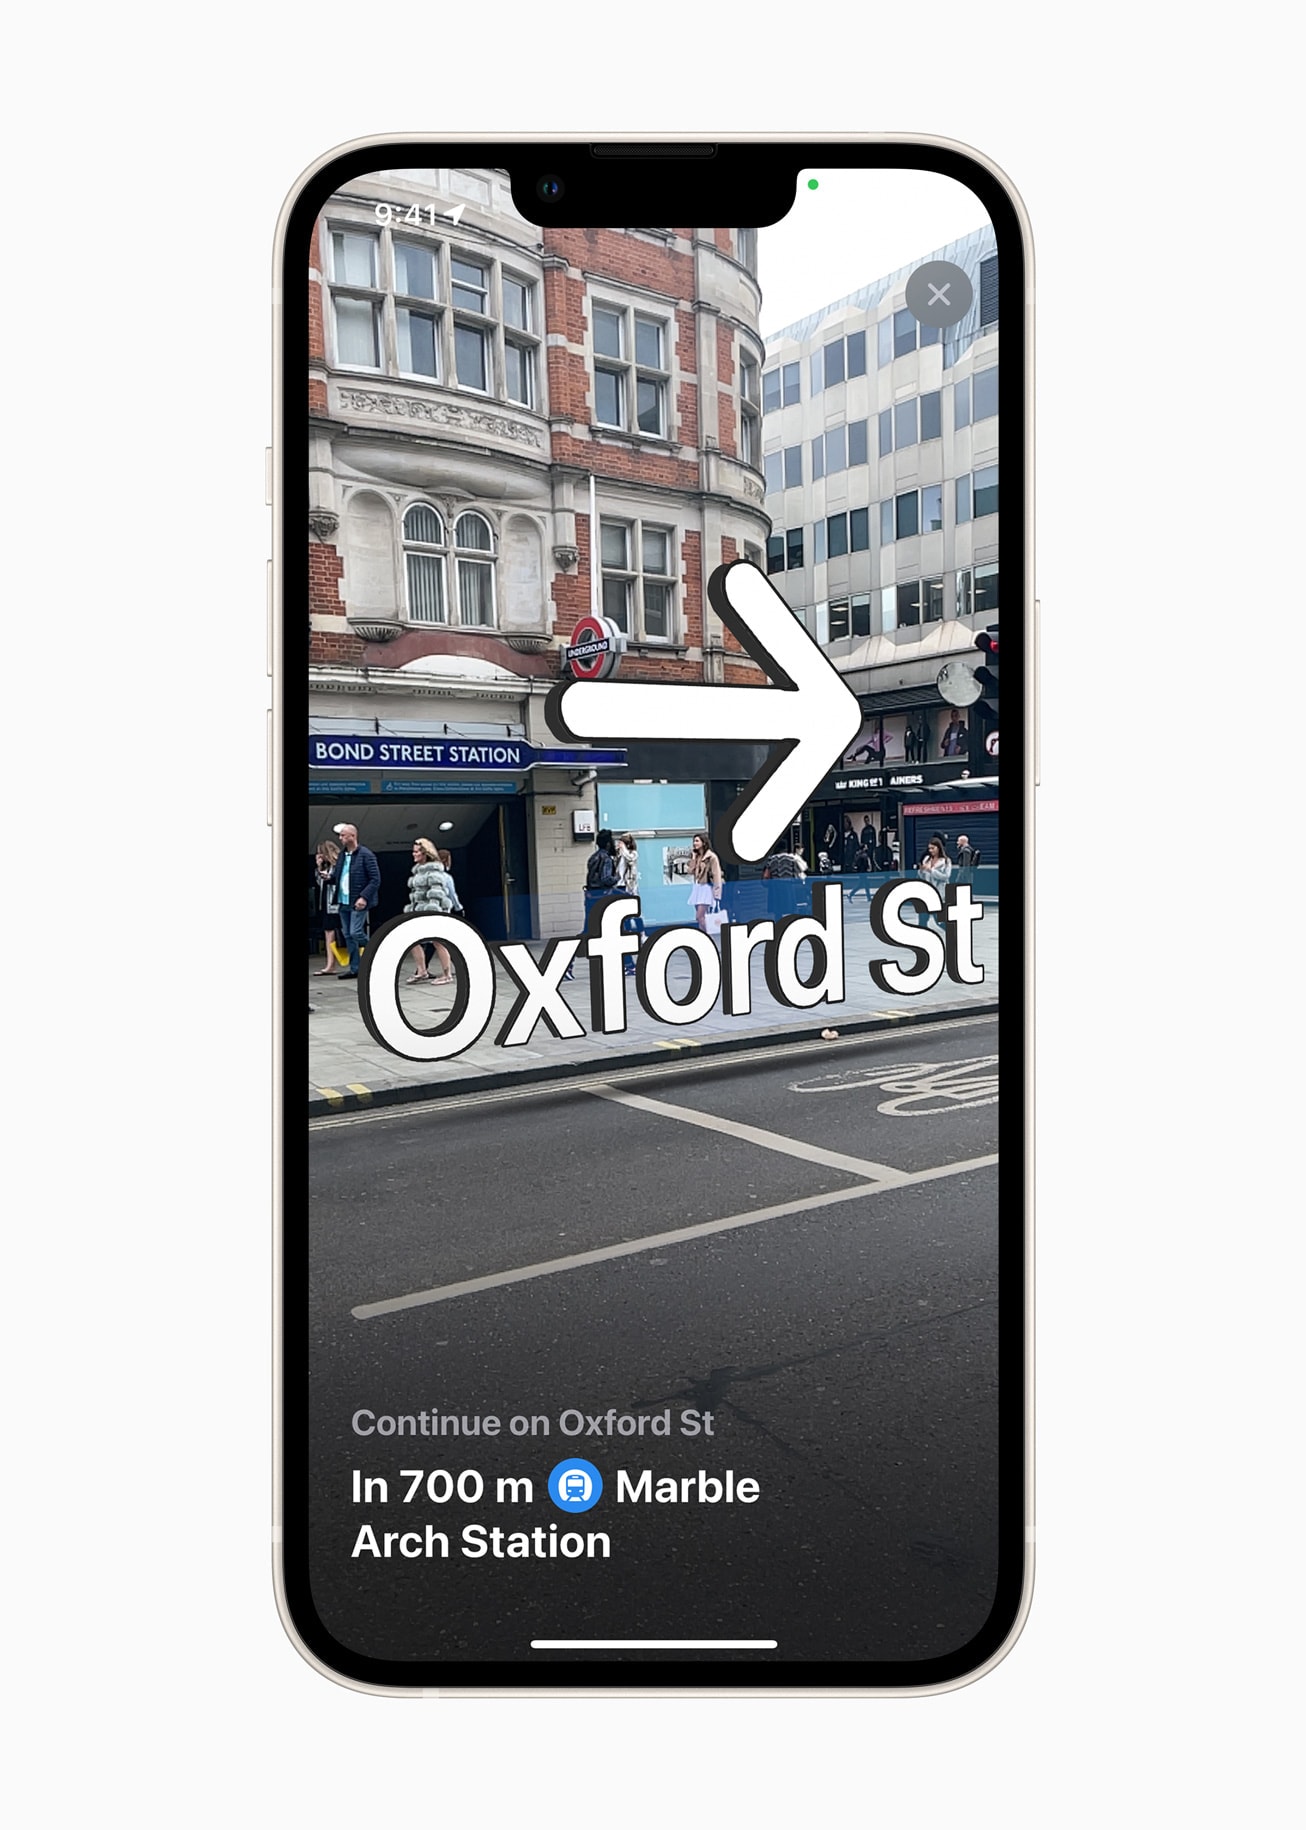 Walking directions are now immersive, showing you the actual streets and places.